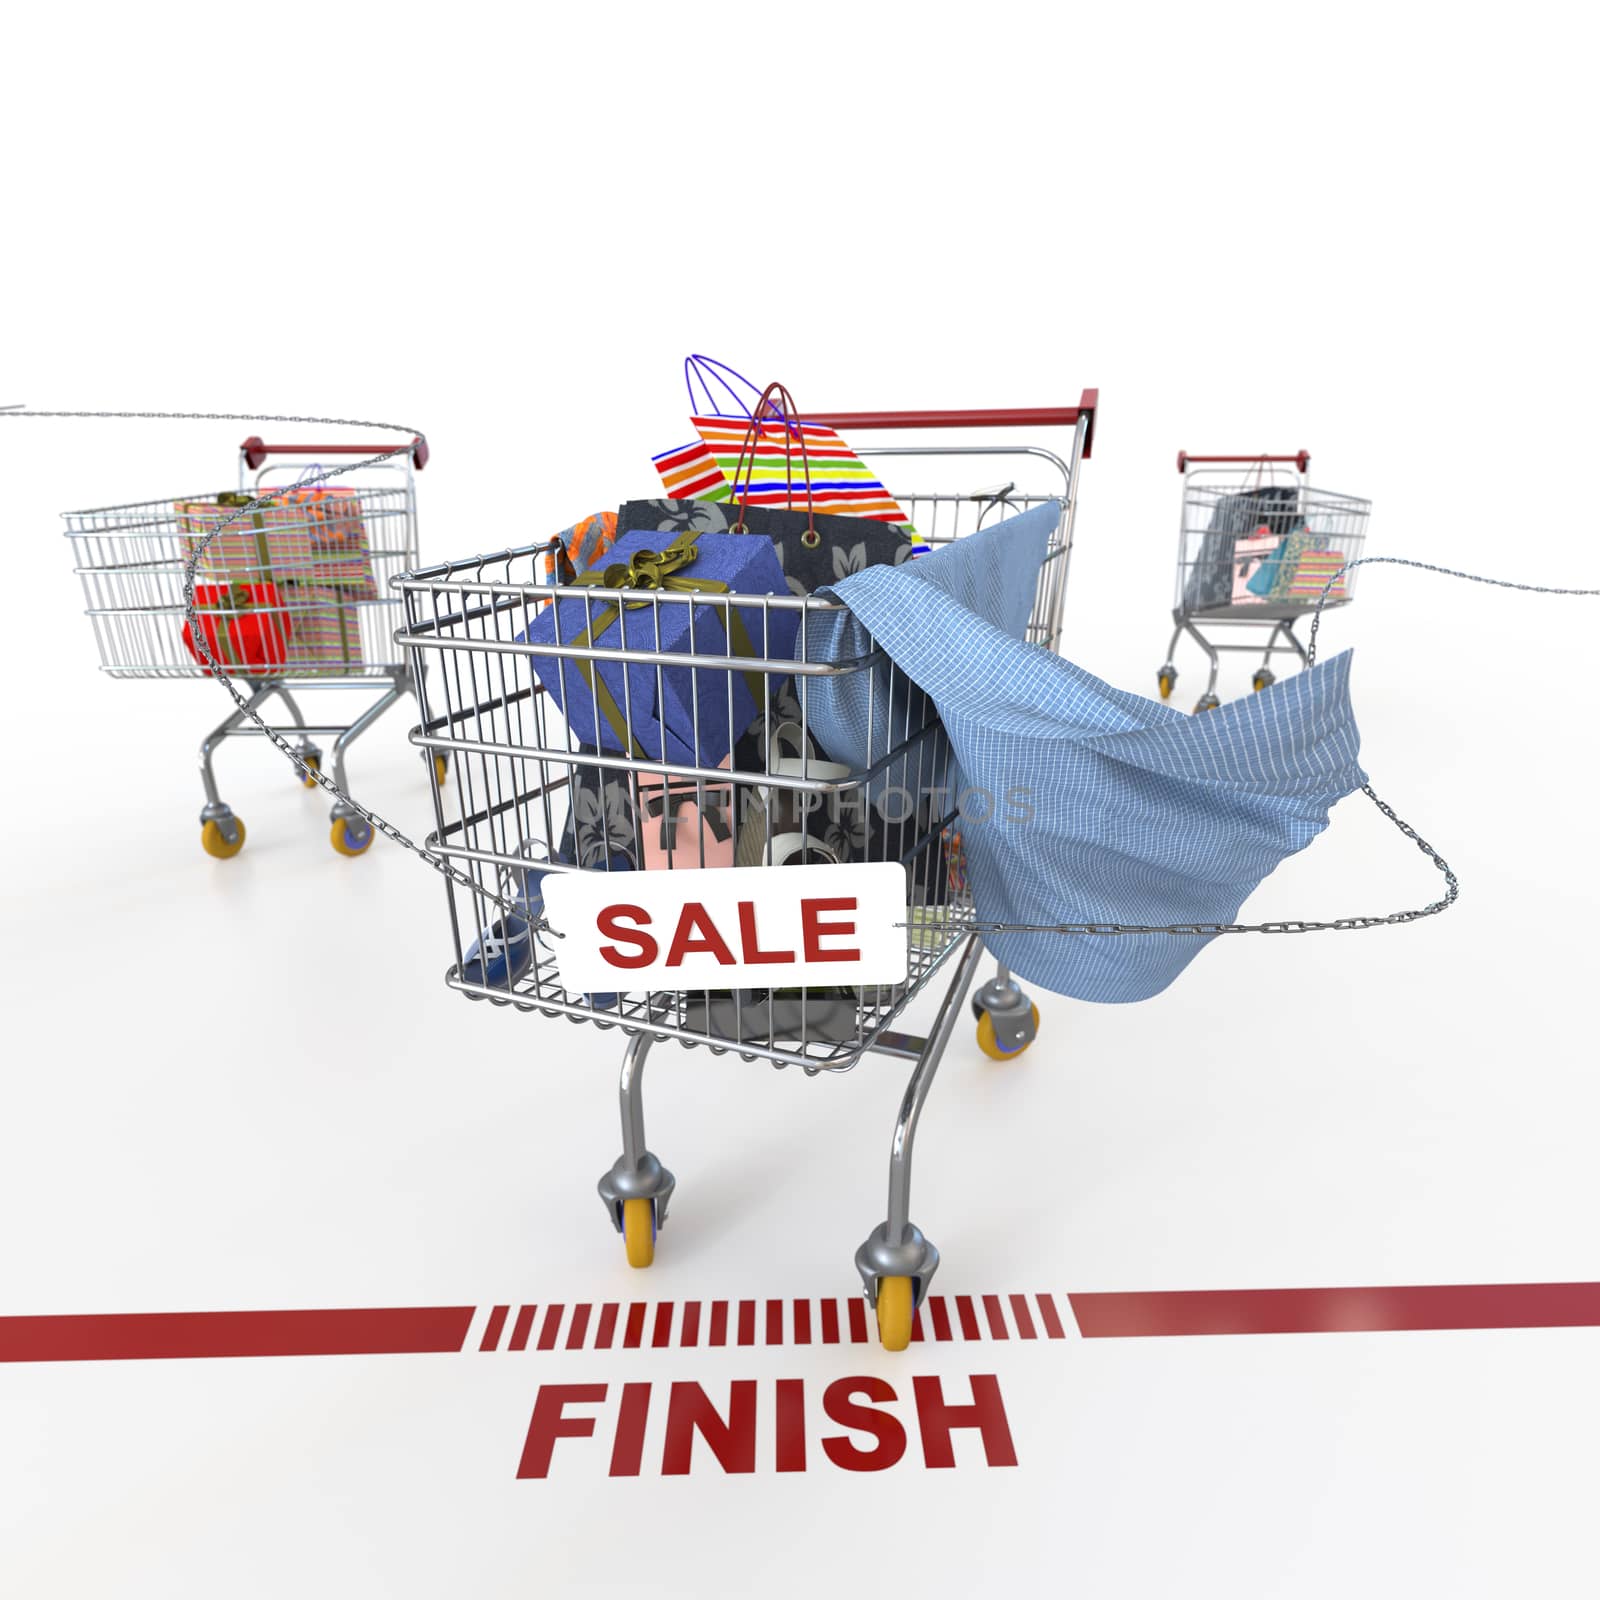 shopping sale concept background with shopping trolley on isolate white by denisgo